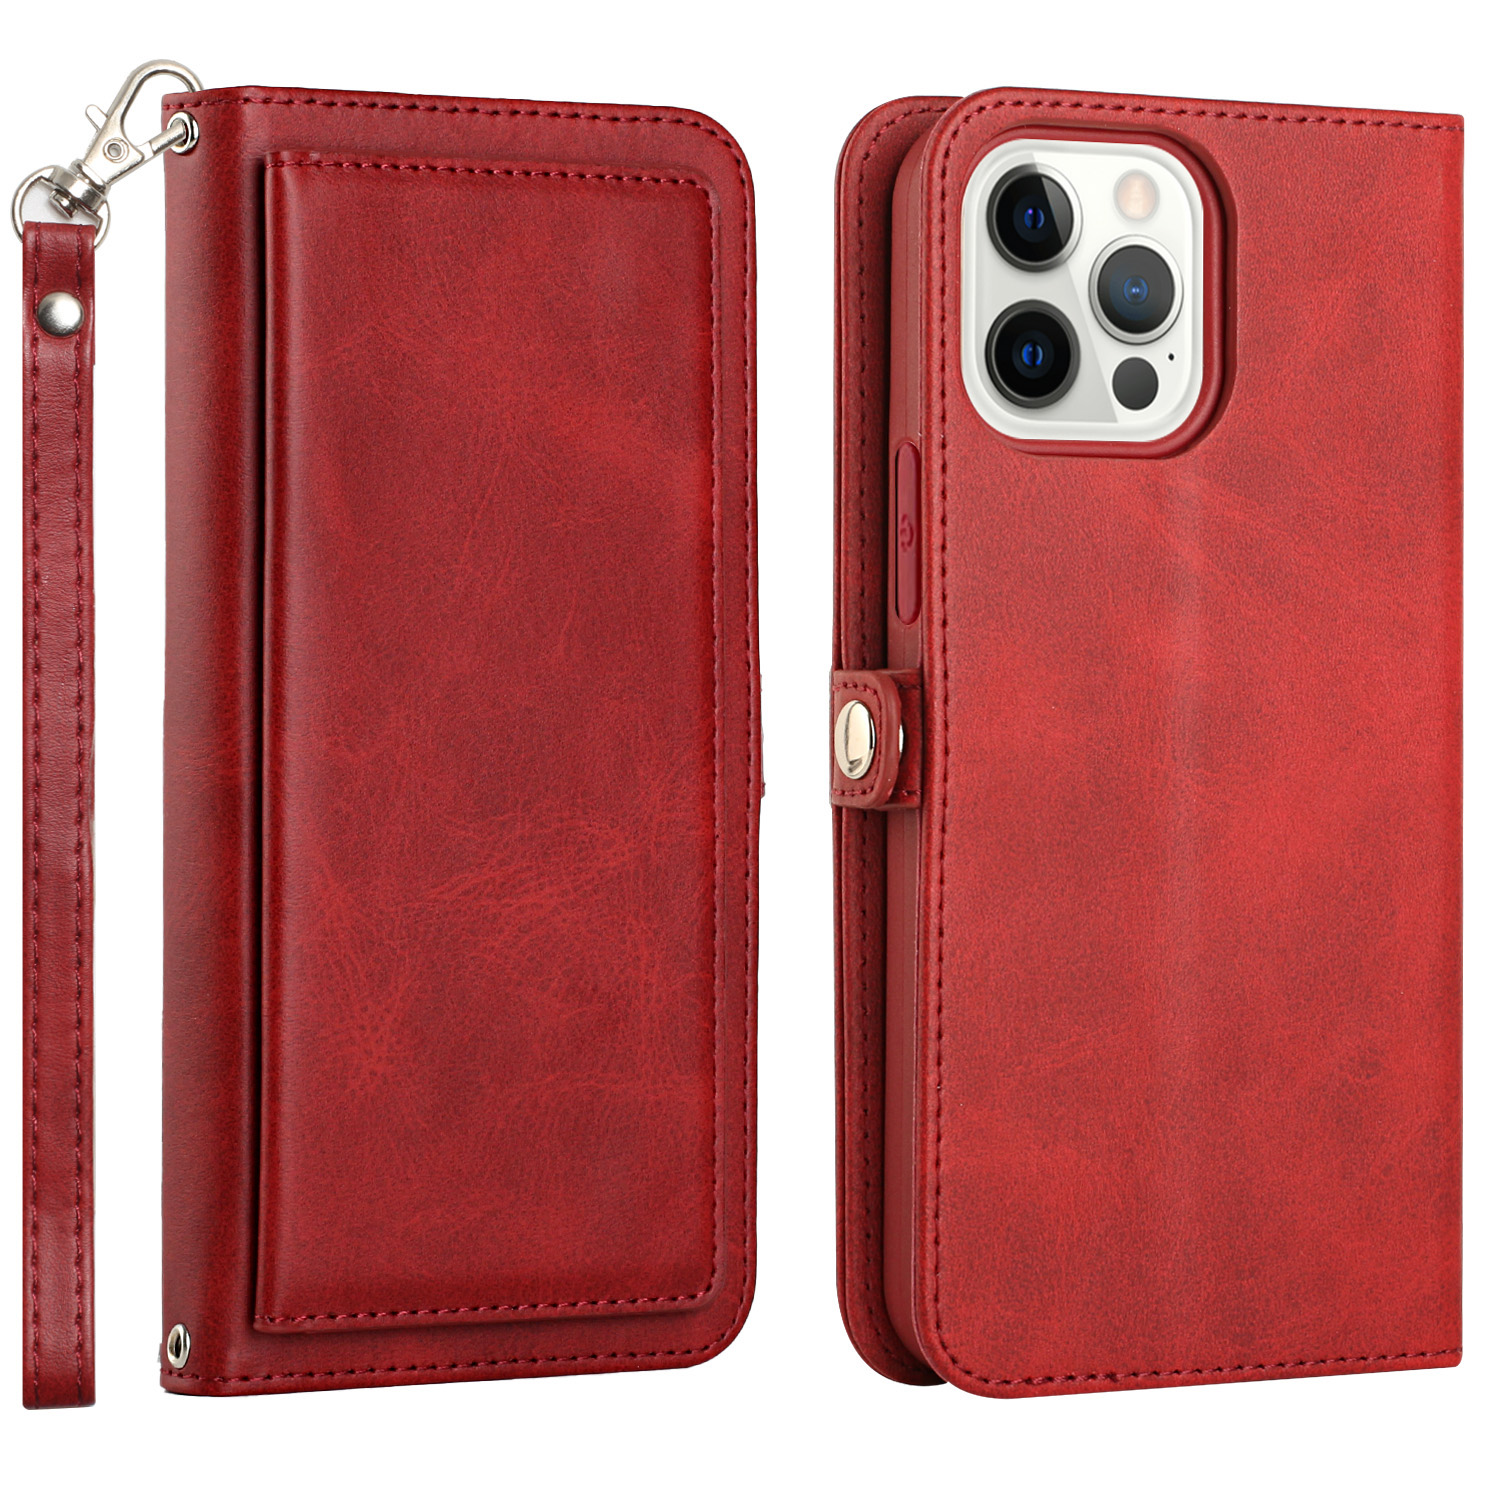 Premium PU LEATHER WALLET Case with Card Slots for iPhone 14 Pro [6.1] (Red)